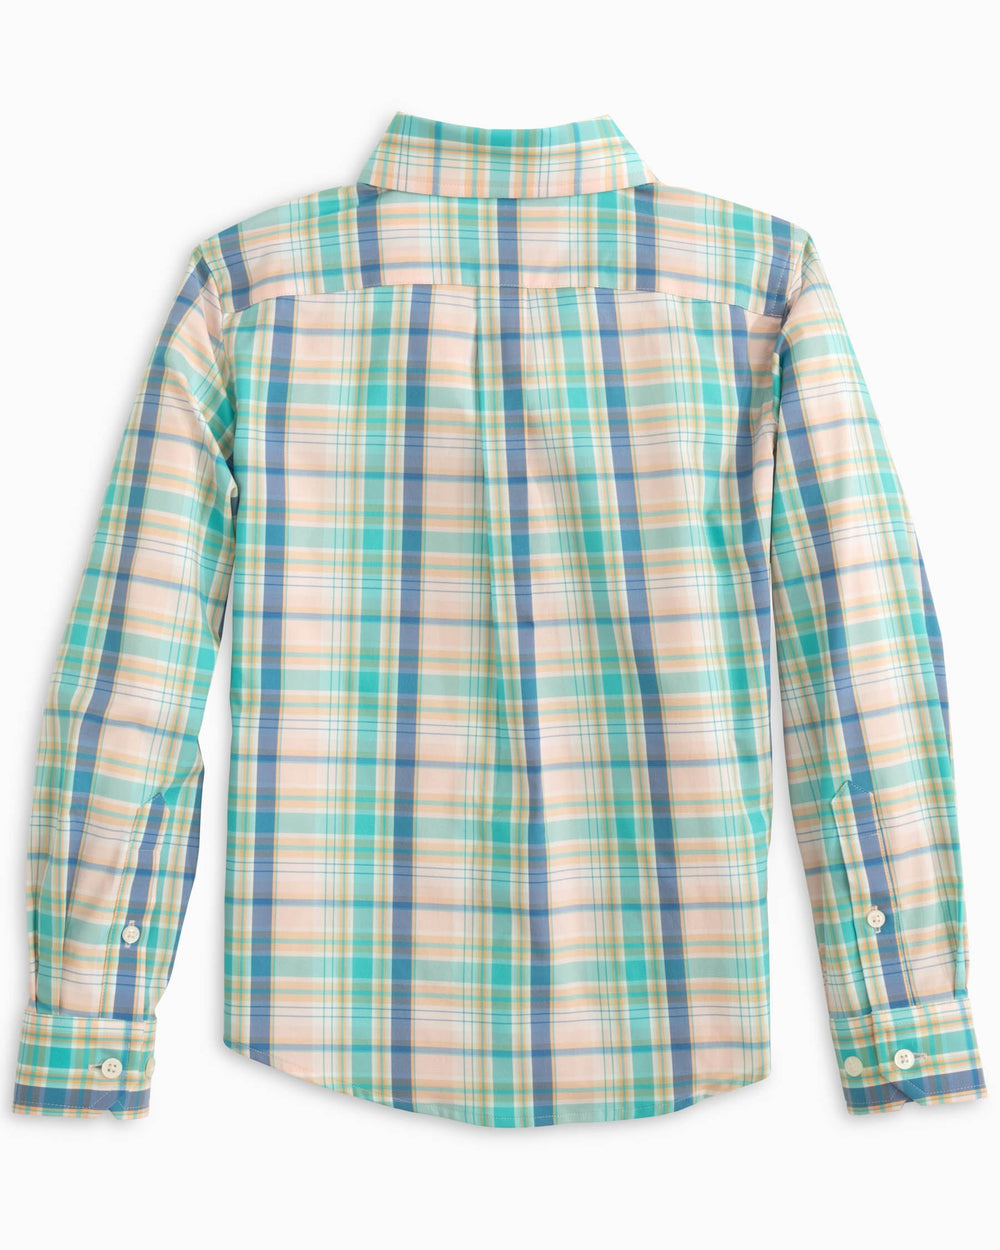 The back view of the Southern Tide Youth Sky Valley Plaid Intercoastal Sport Shirt by Southern Tide - Rose Blush